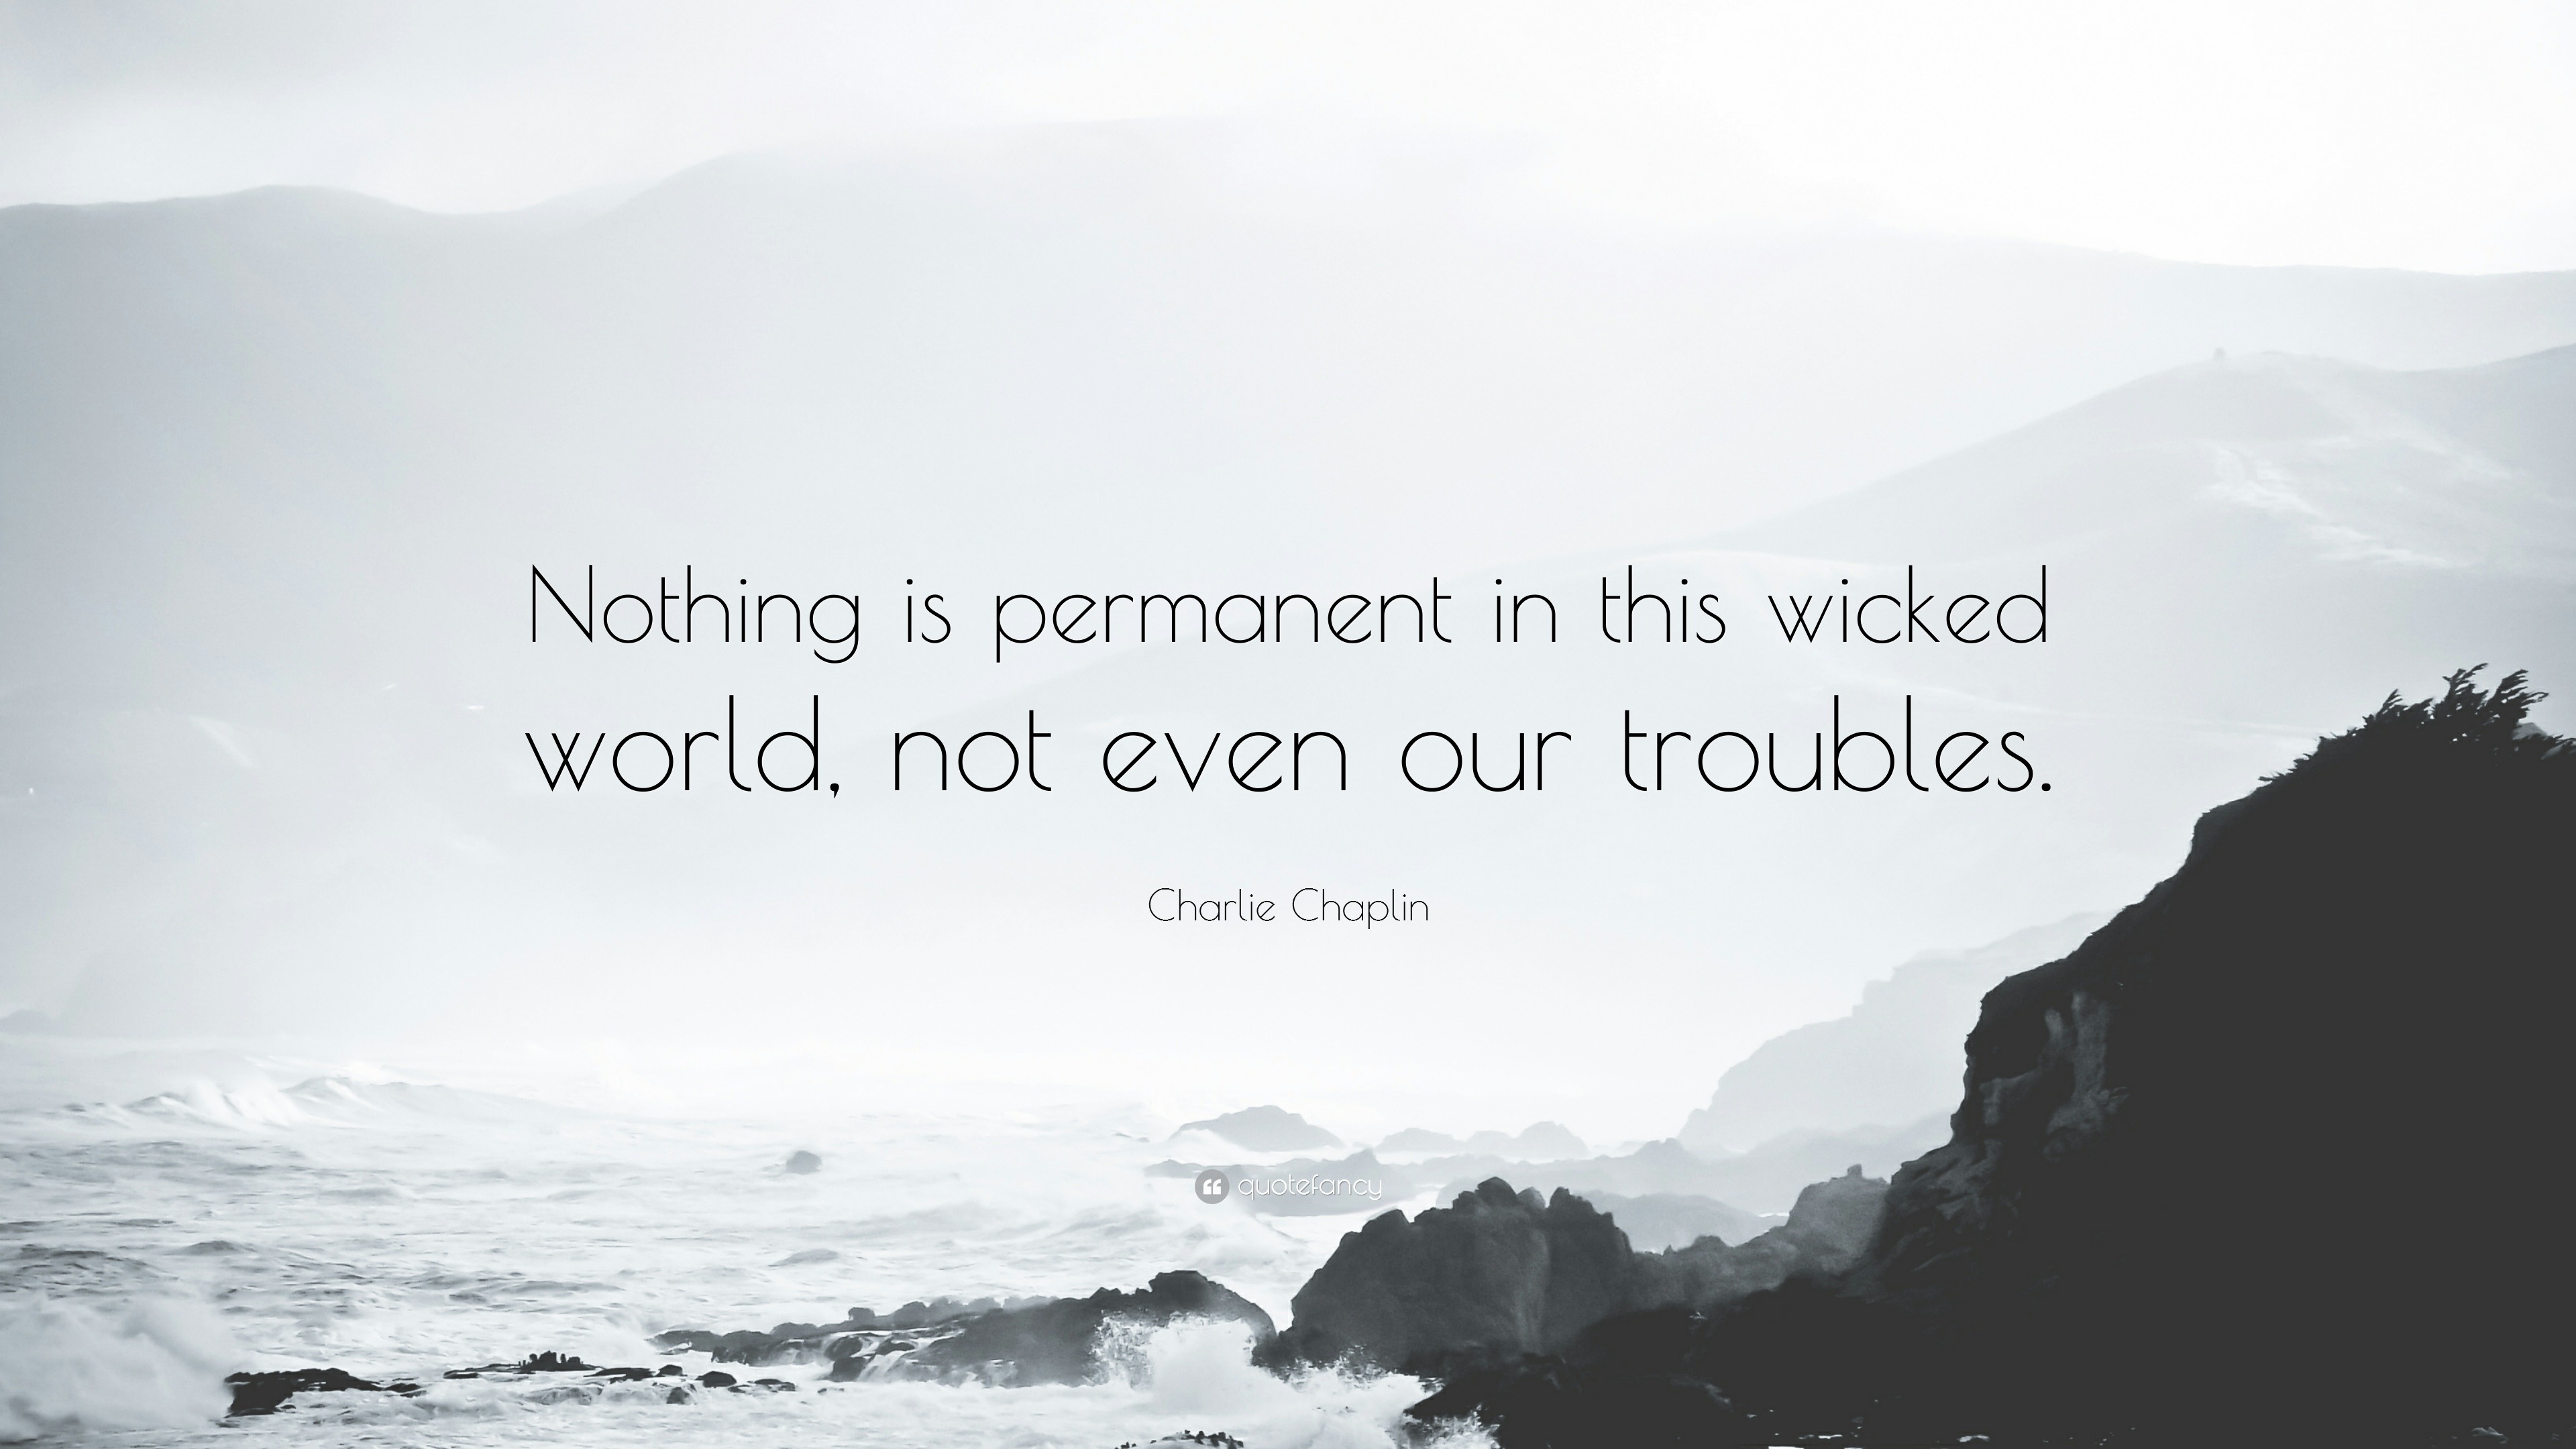 Charlie Chaplin Quote: "Nothing is permanent in this wicked world, not even our troubles." (26 ...